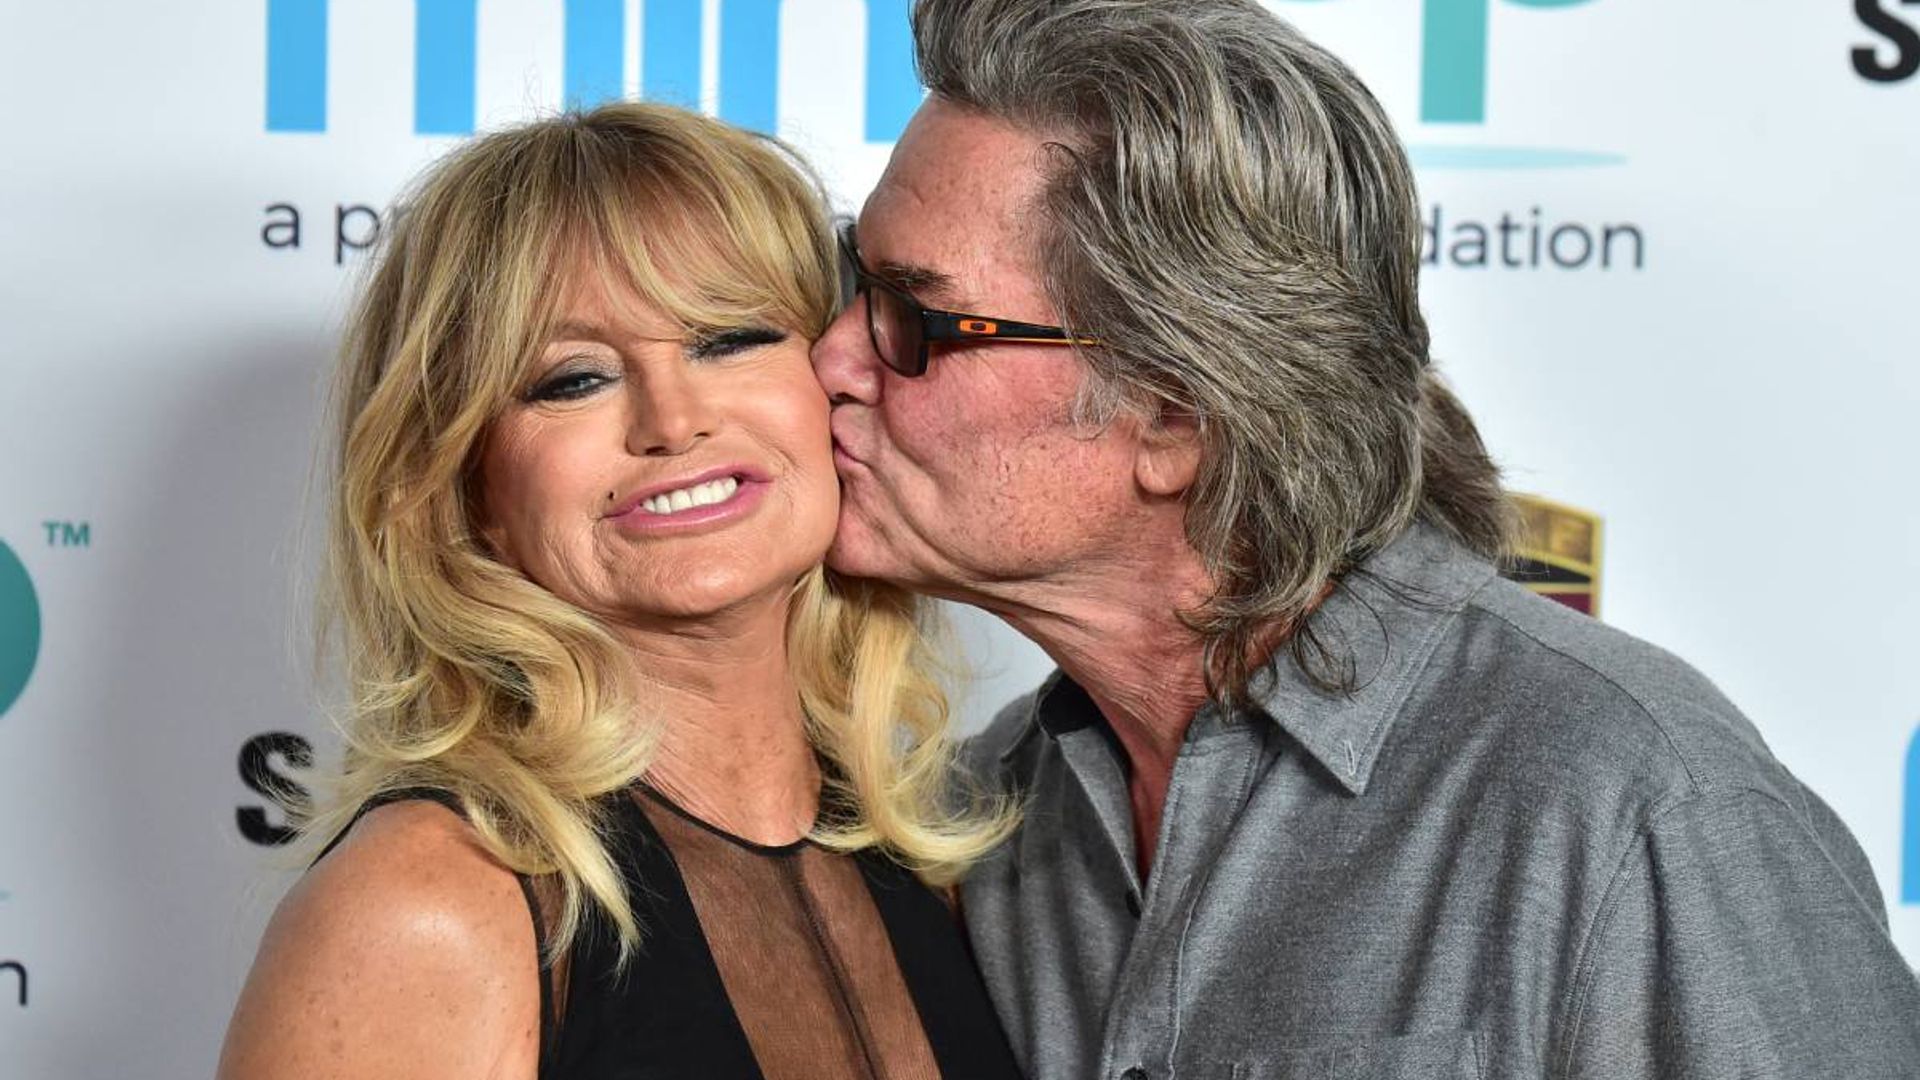 Goldie Hawn and Kurt Russell reveal new relationship milestone in rare joint interview